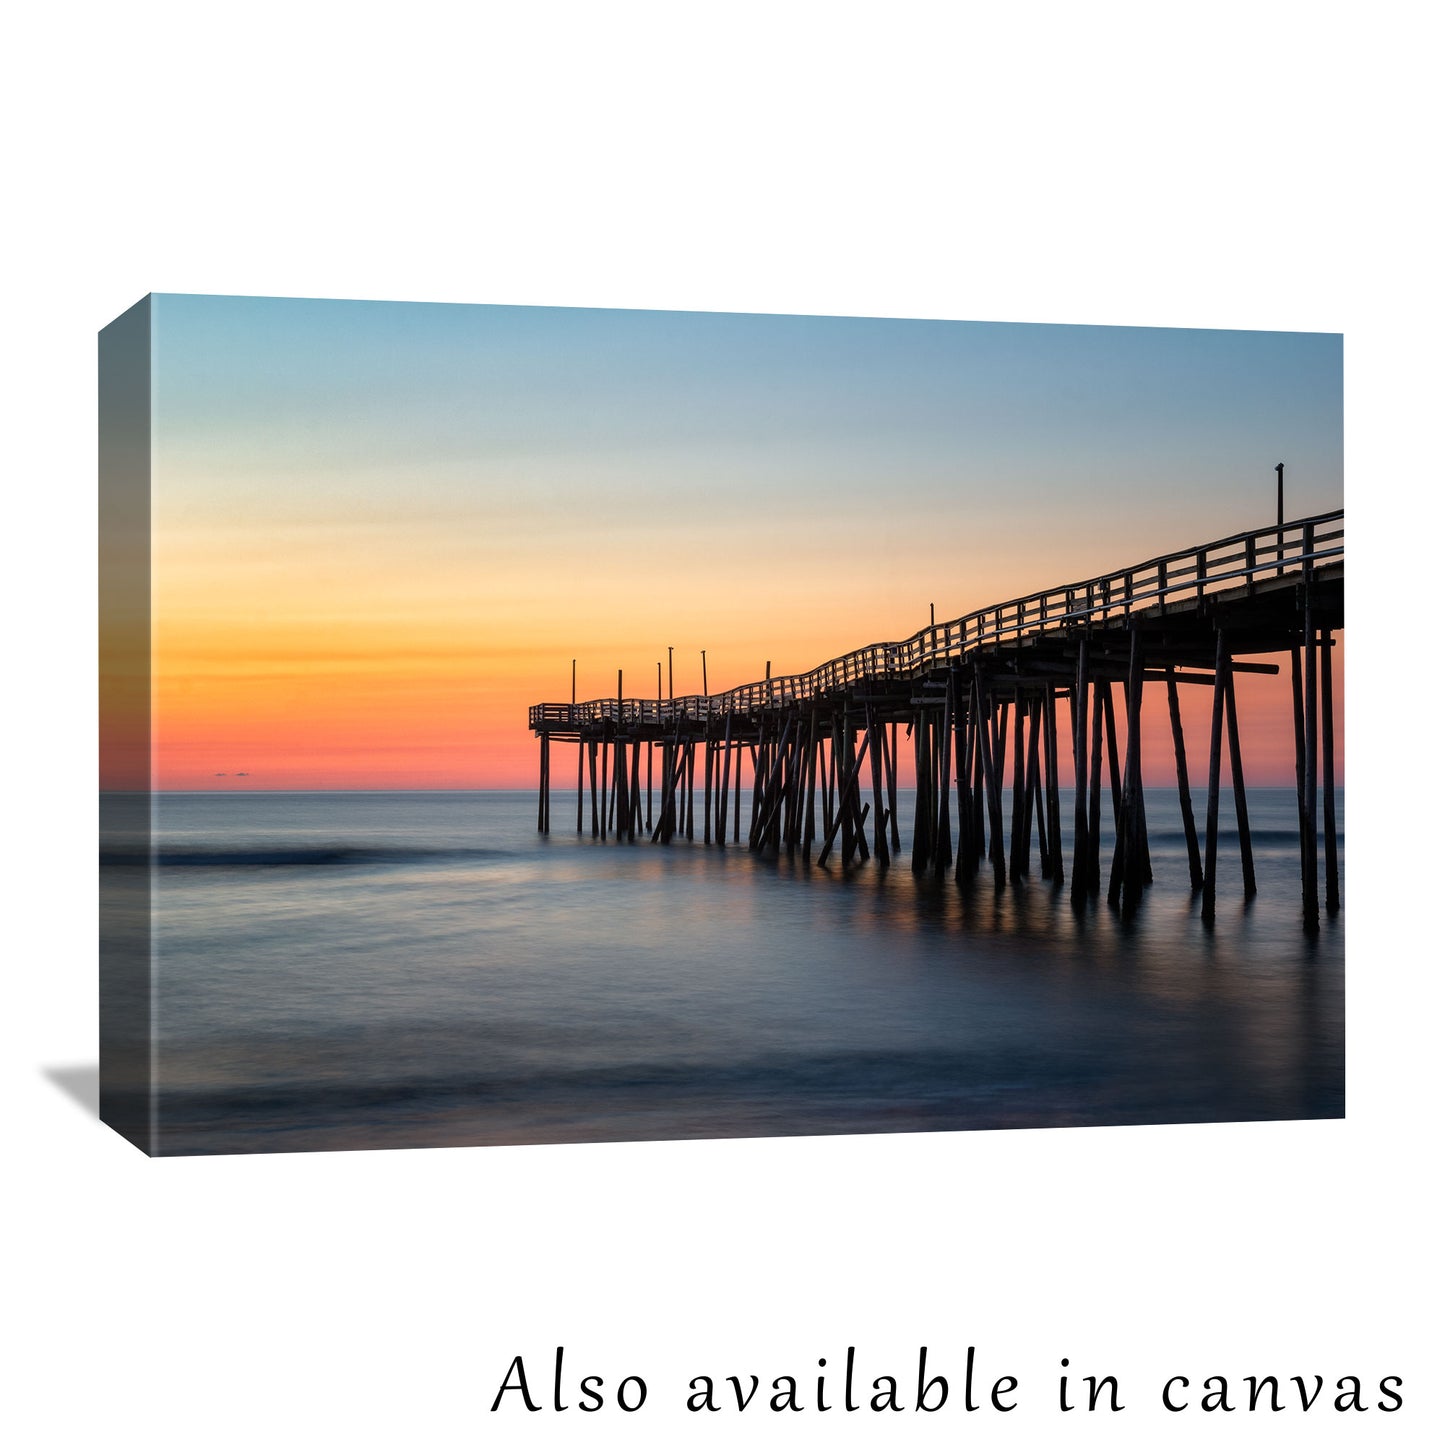 The photograph is beautifully presented on a gallery-wrapped canvas, showing this nautical photograph is also available as a canvas print for those interested in a ready-to-hang solution.